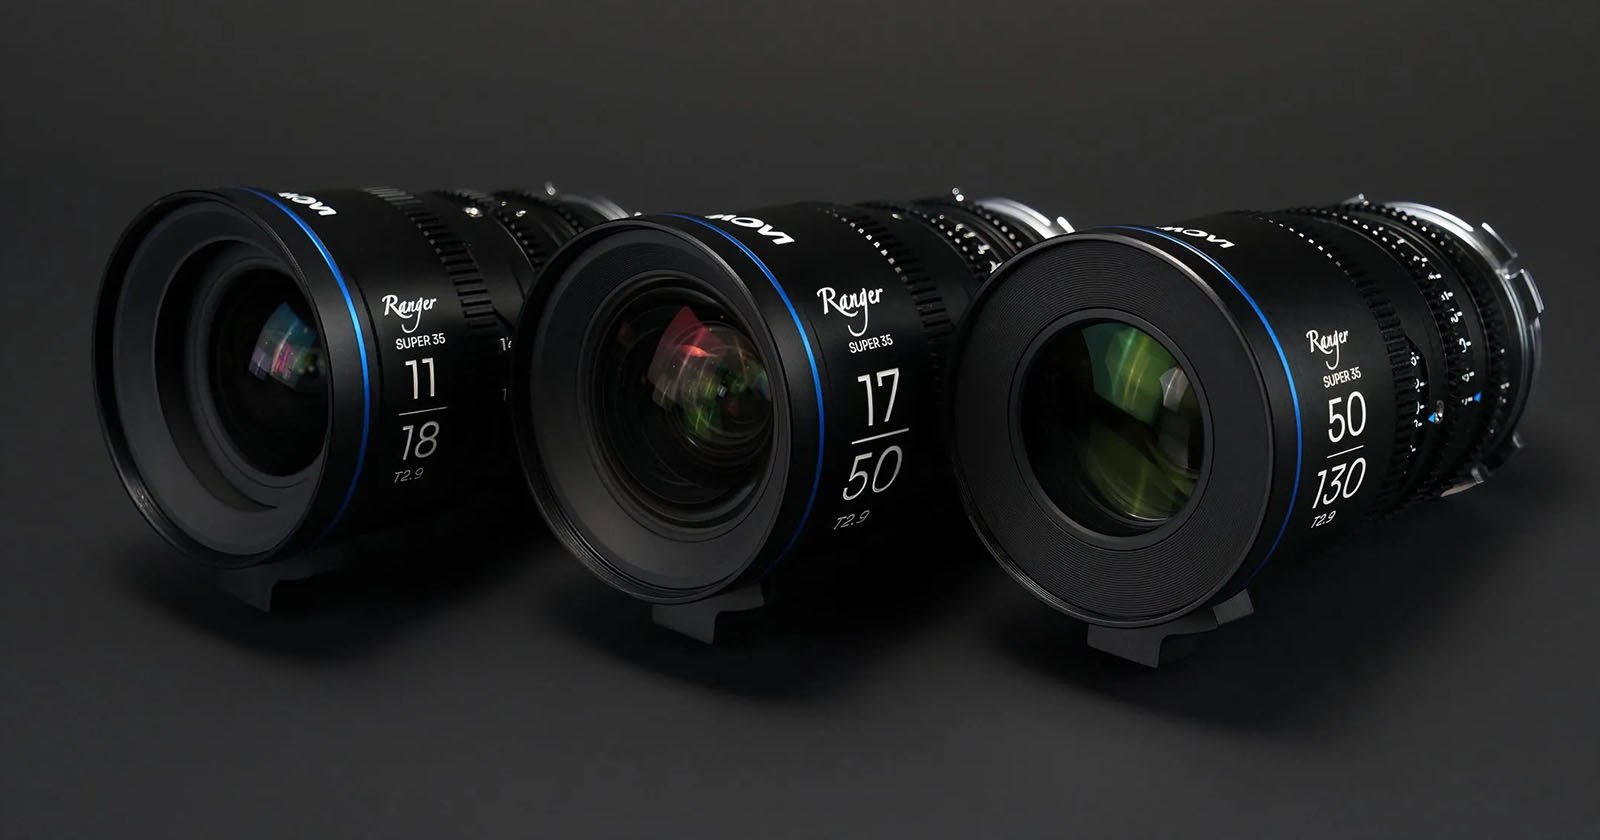 Three cinema lenses lined up, with focal lengths marked as 11mm, 17mm, and 50mm, displaying blue detailing against a dark background.